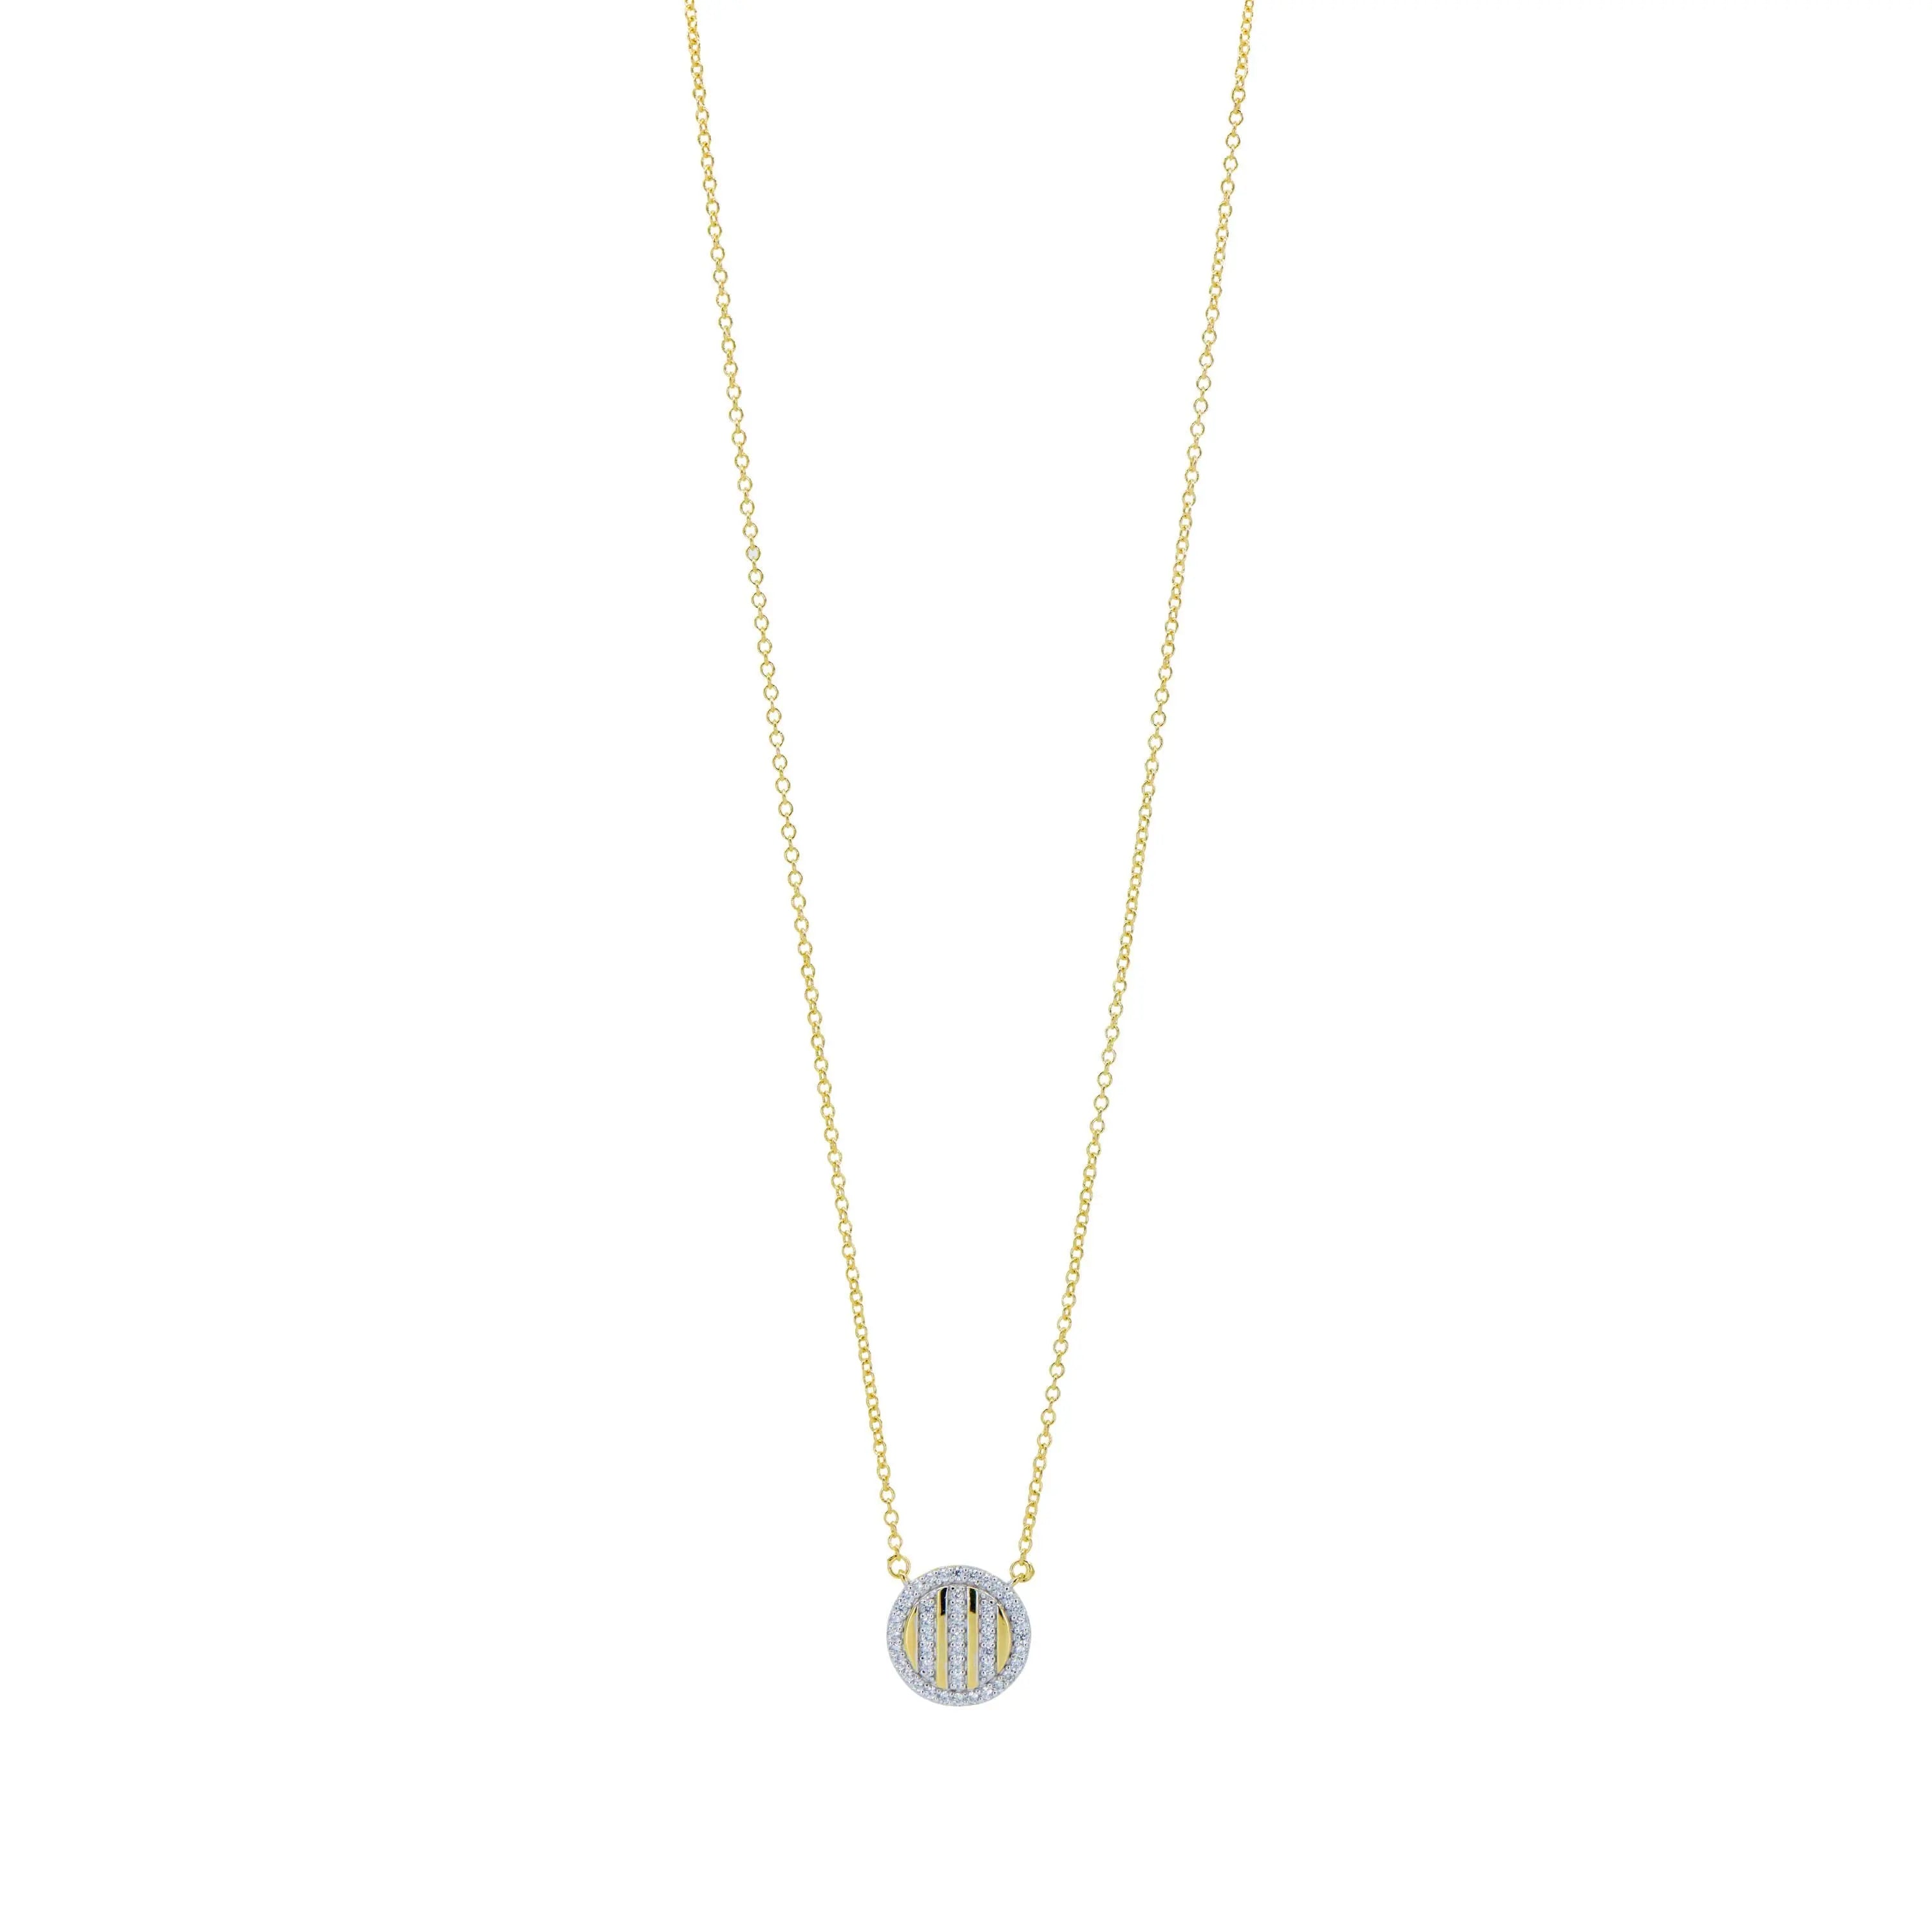 Sterling Silver & 14k Gold Over Silver Chain Extender Set